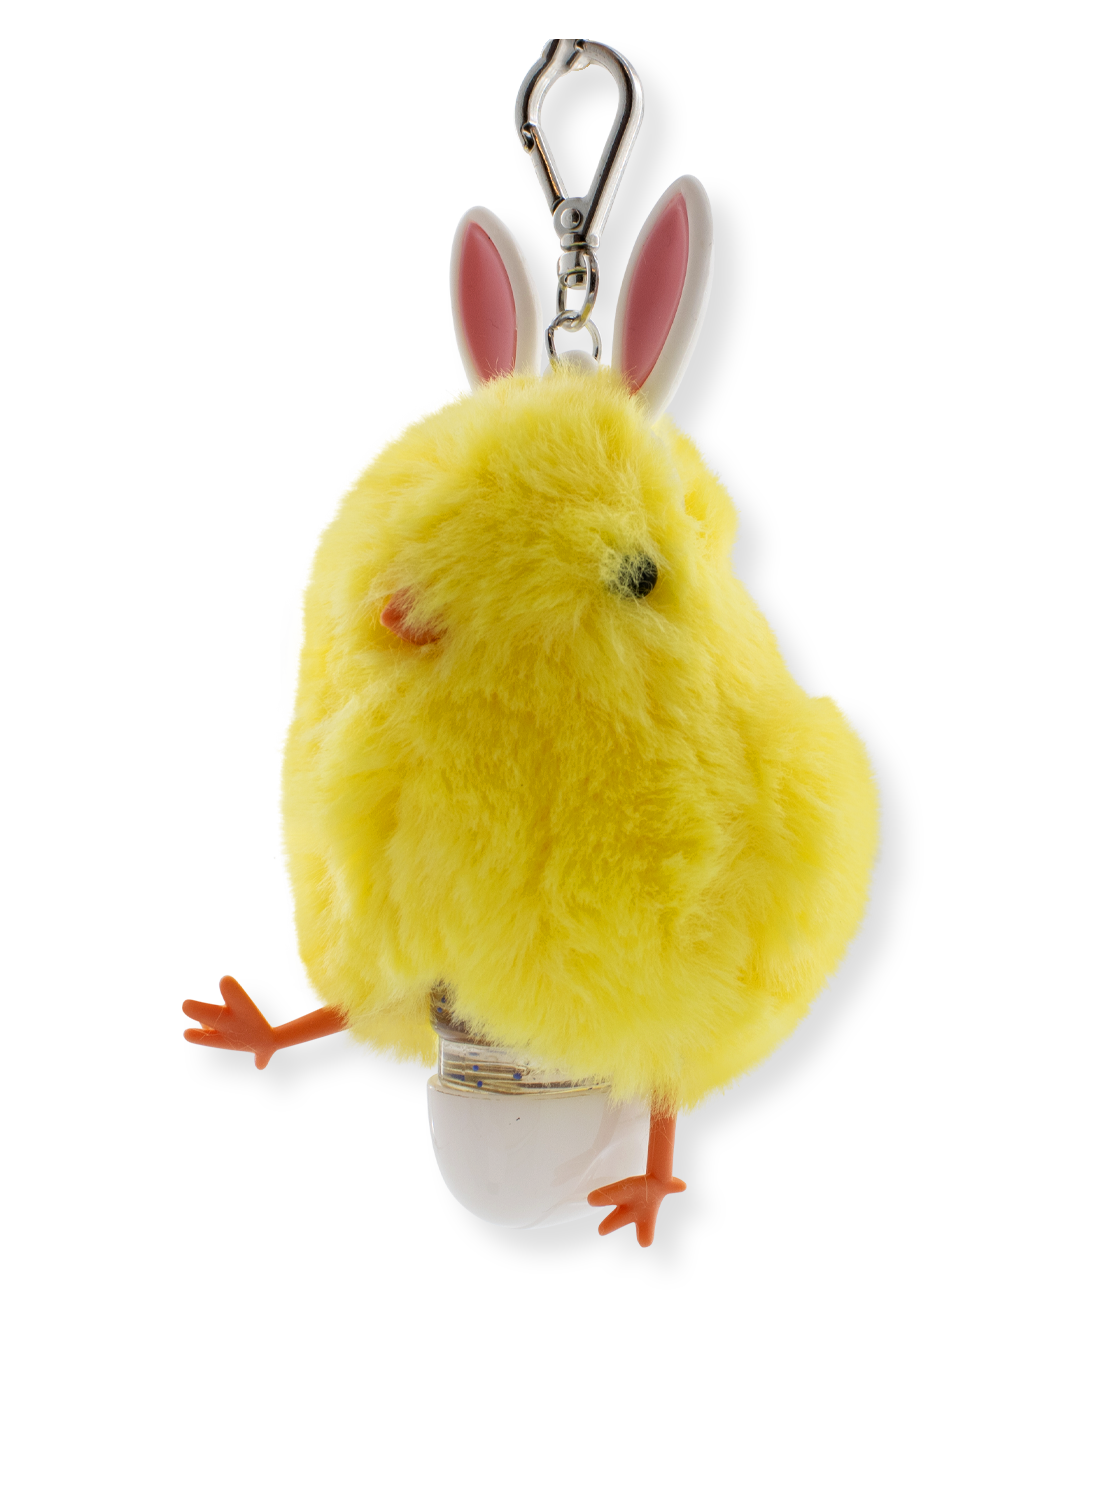 Pendant for hand disinfection gel - Chick with Bunny Ears